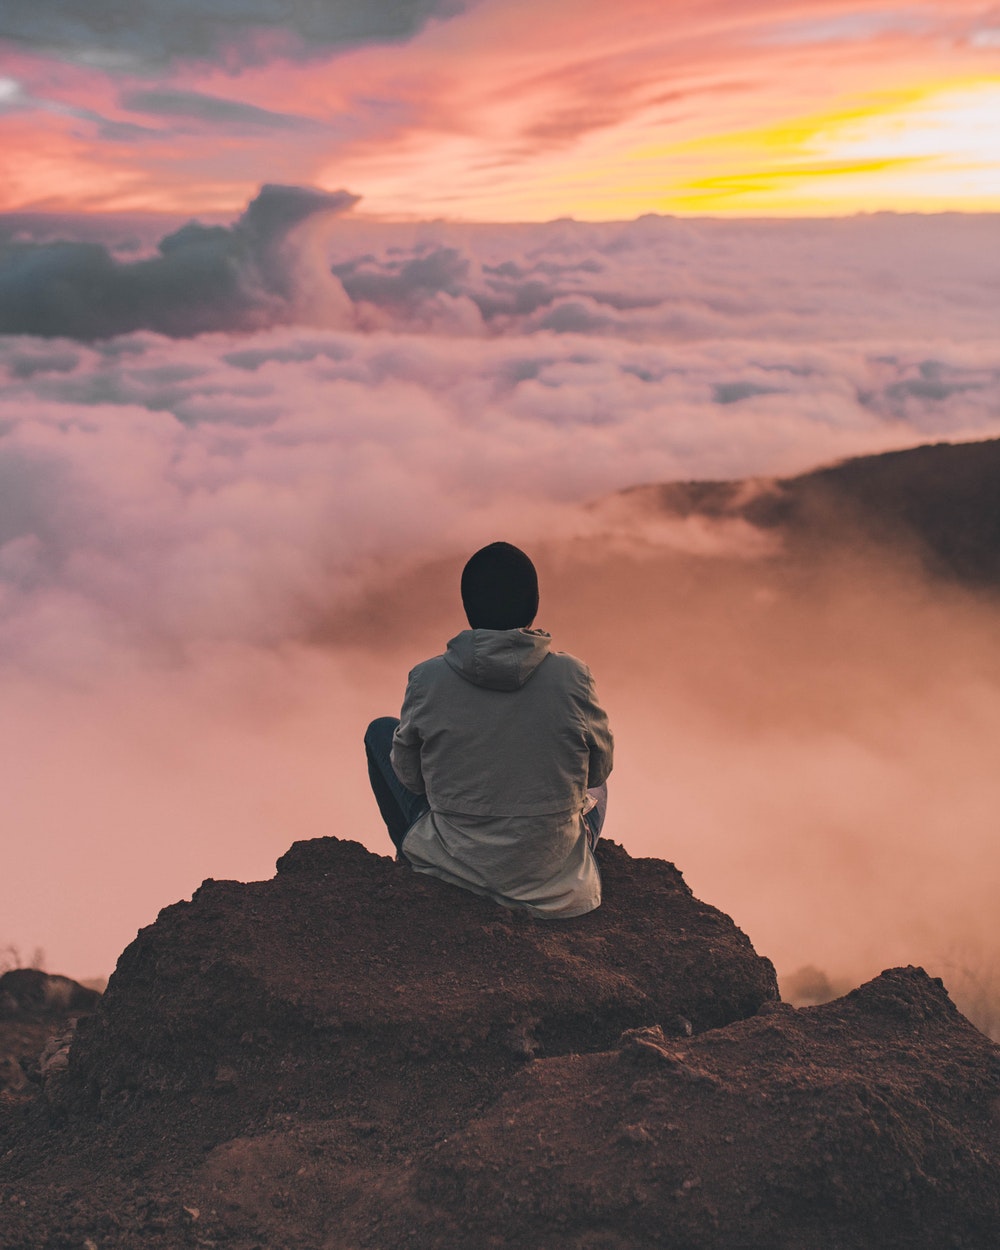 Forgiveness: The Path to Embracing My Lion Heart by Laura Bishop. Photograph of man on cliff looking over clouds and sunset by Ian Stauffer